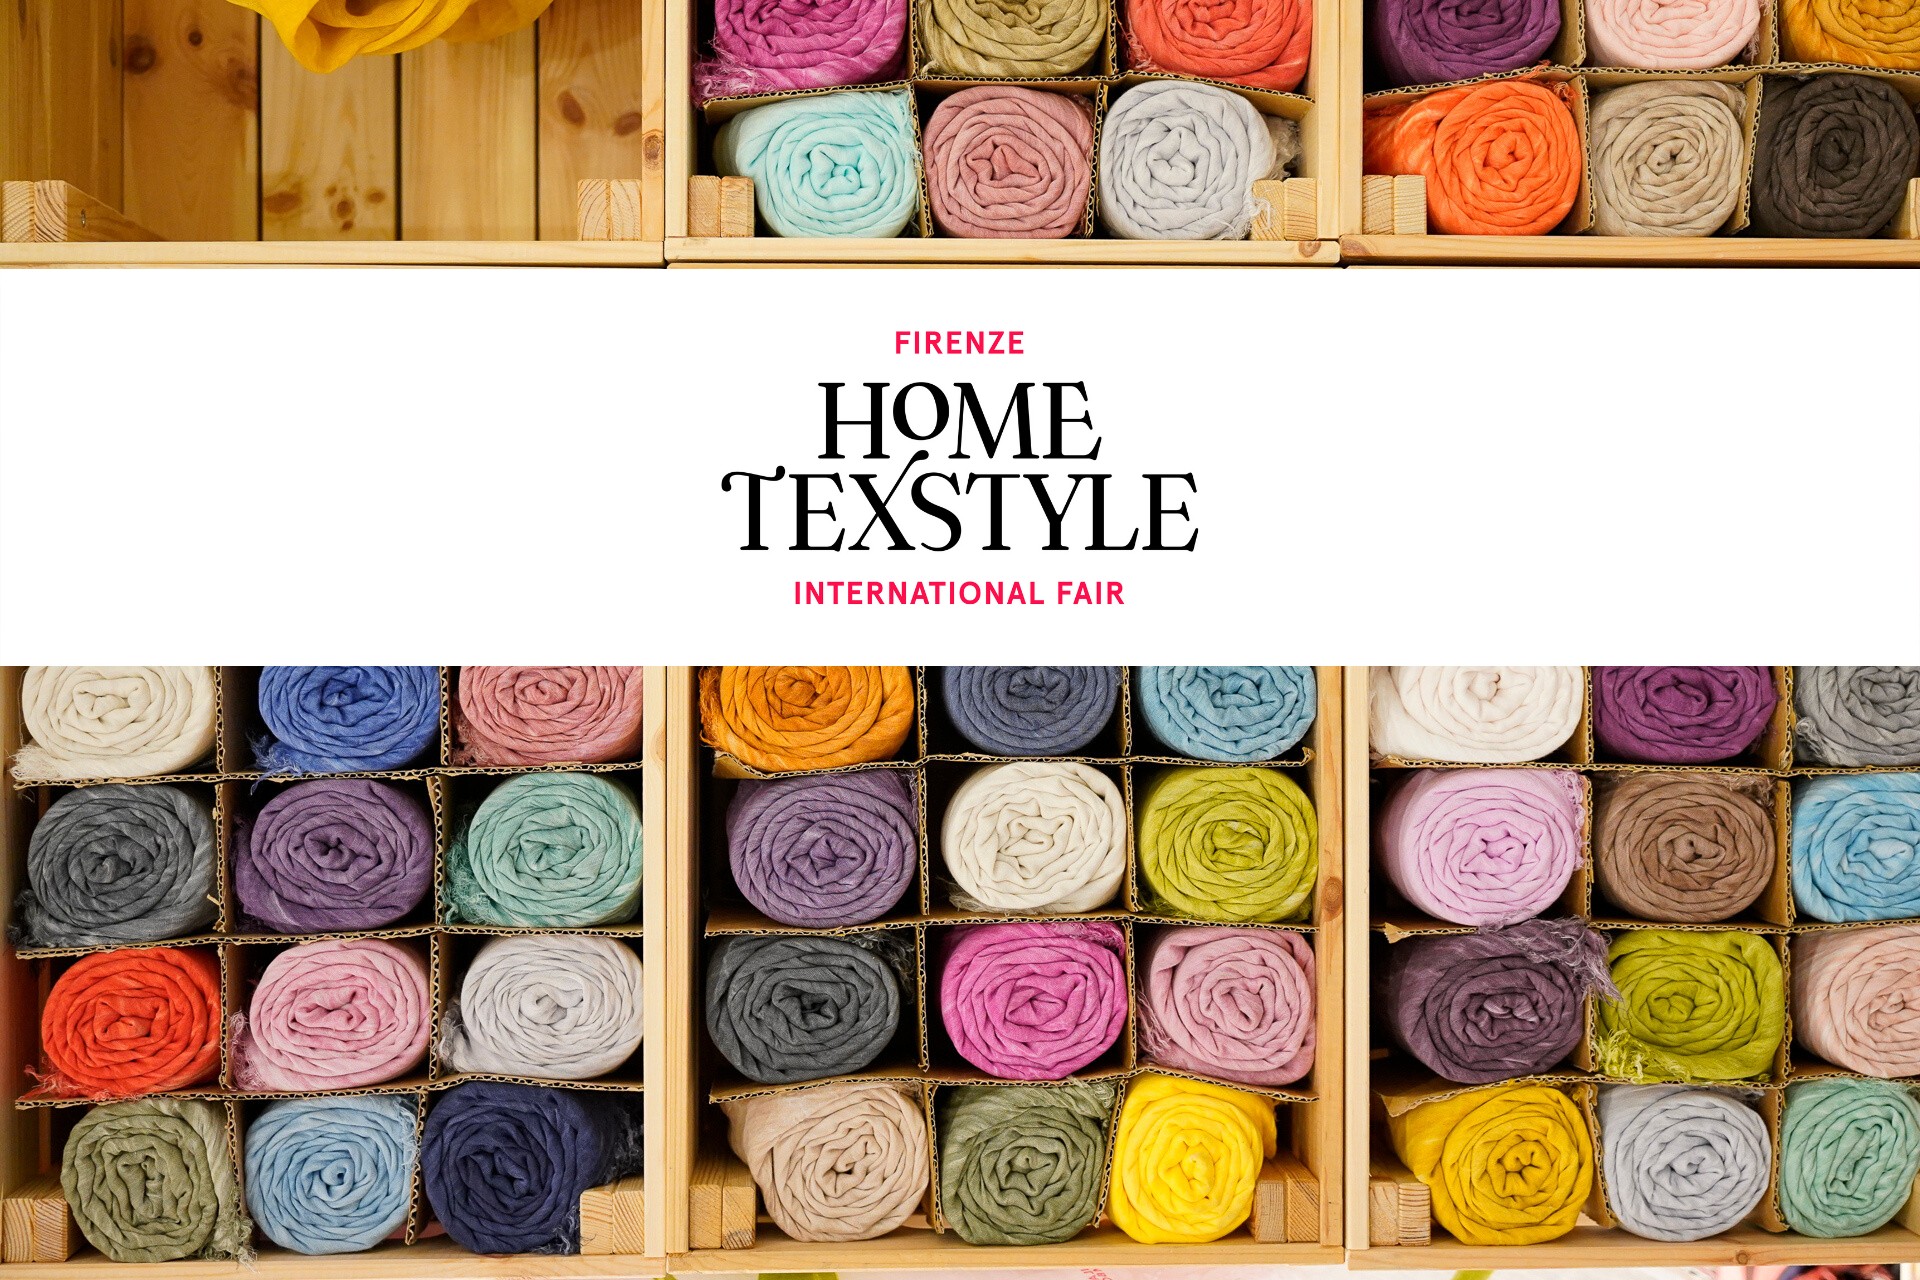 International Fair for textile in Italy - Firenze home texstyle 2022